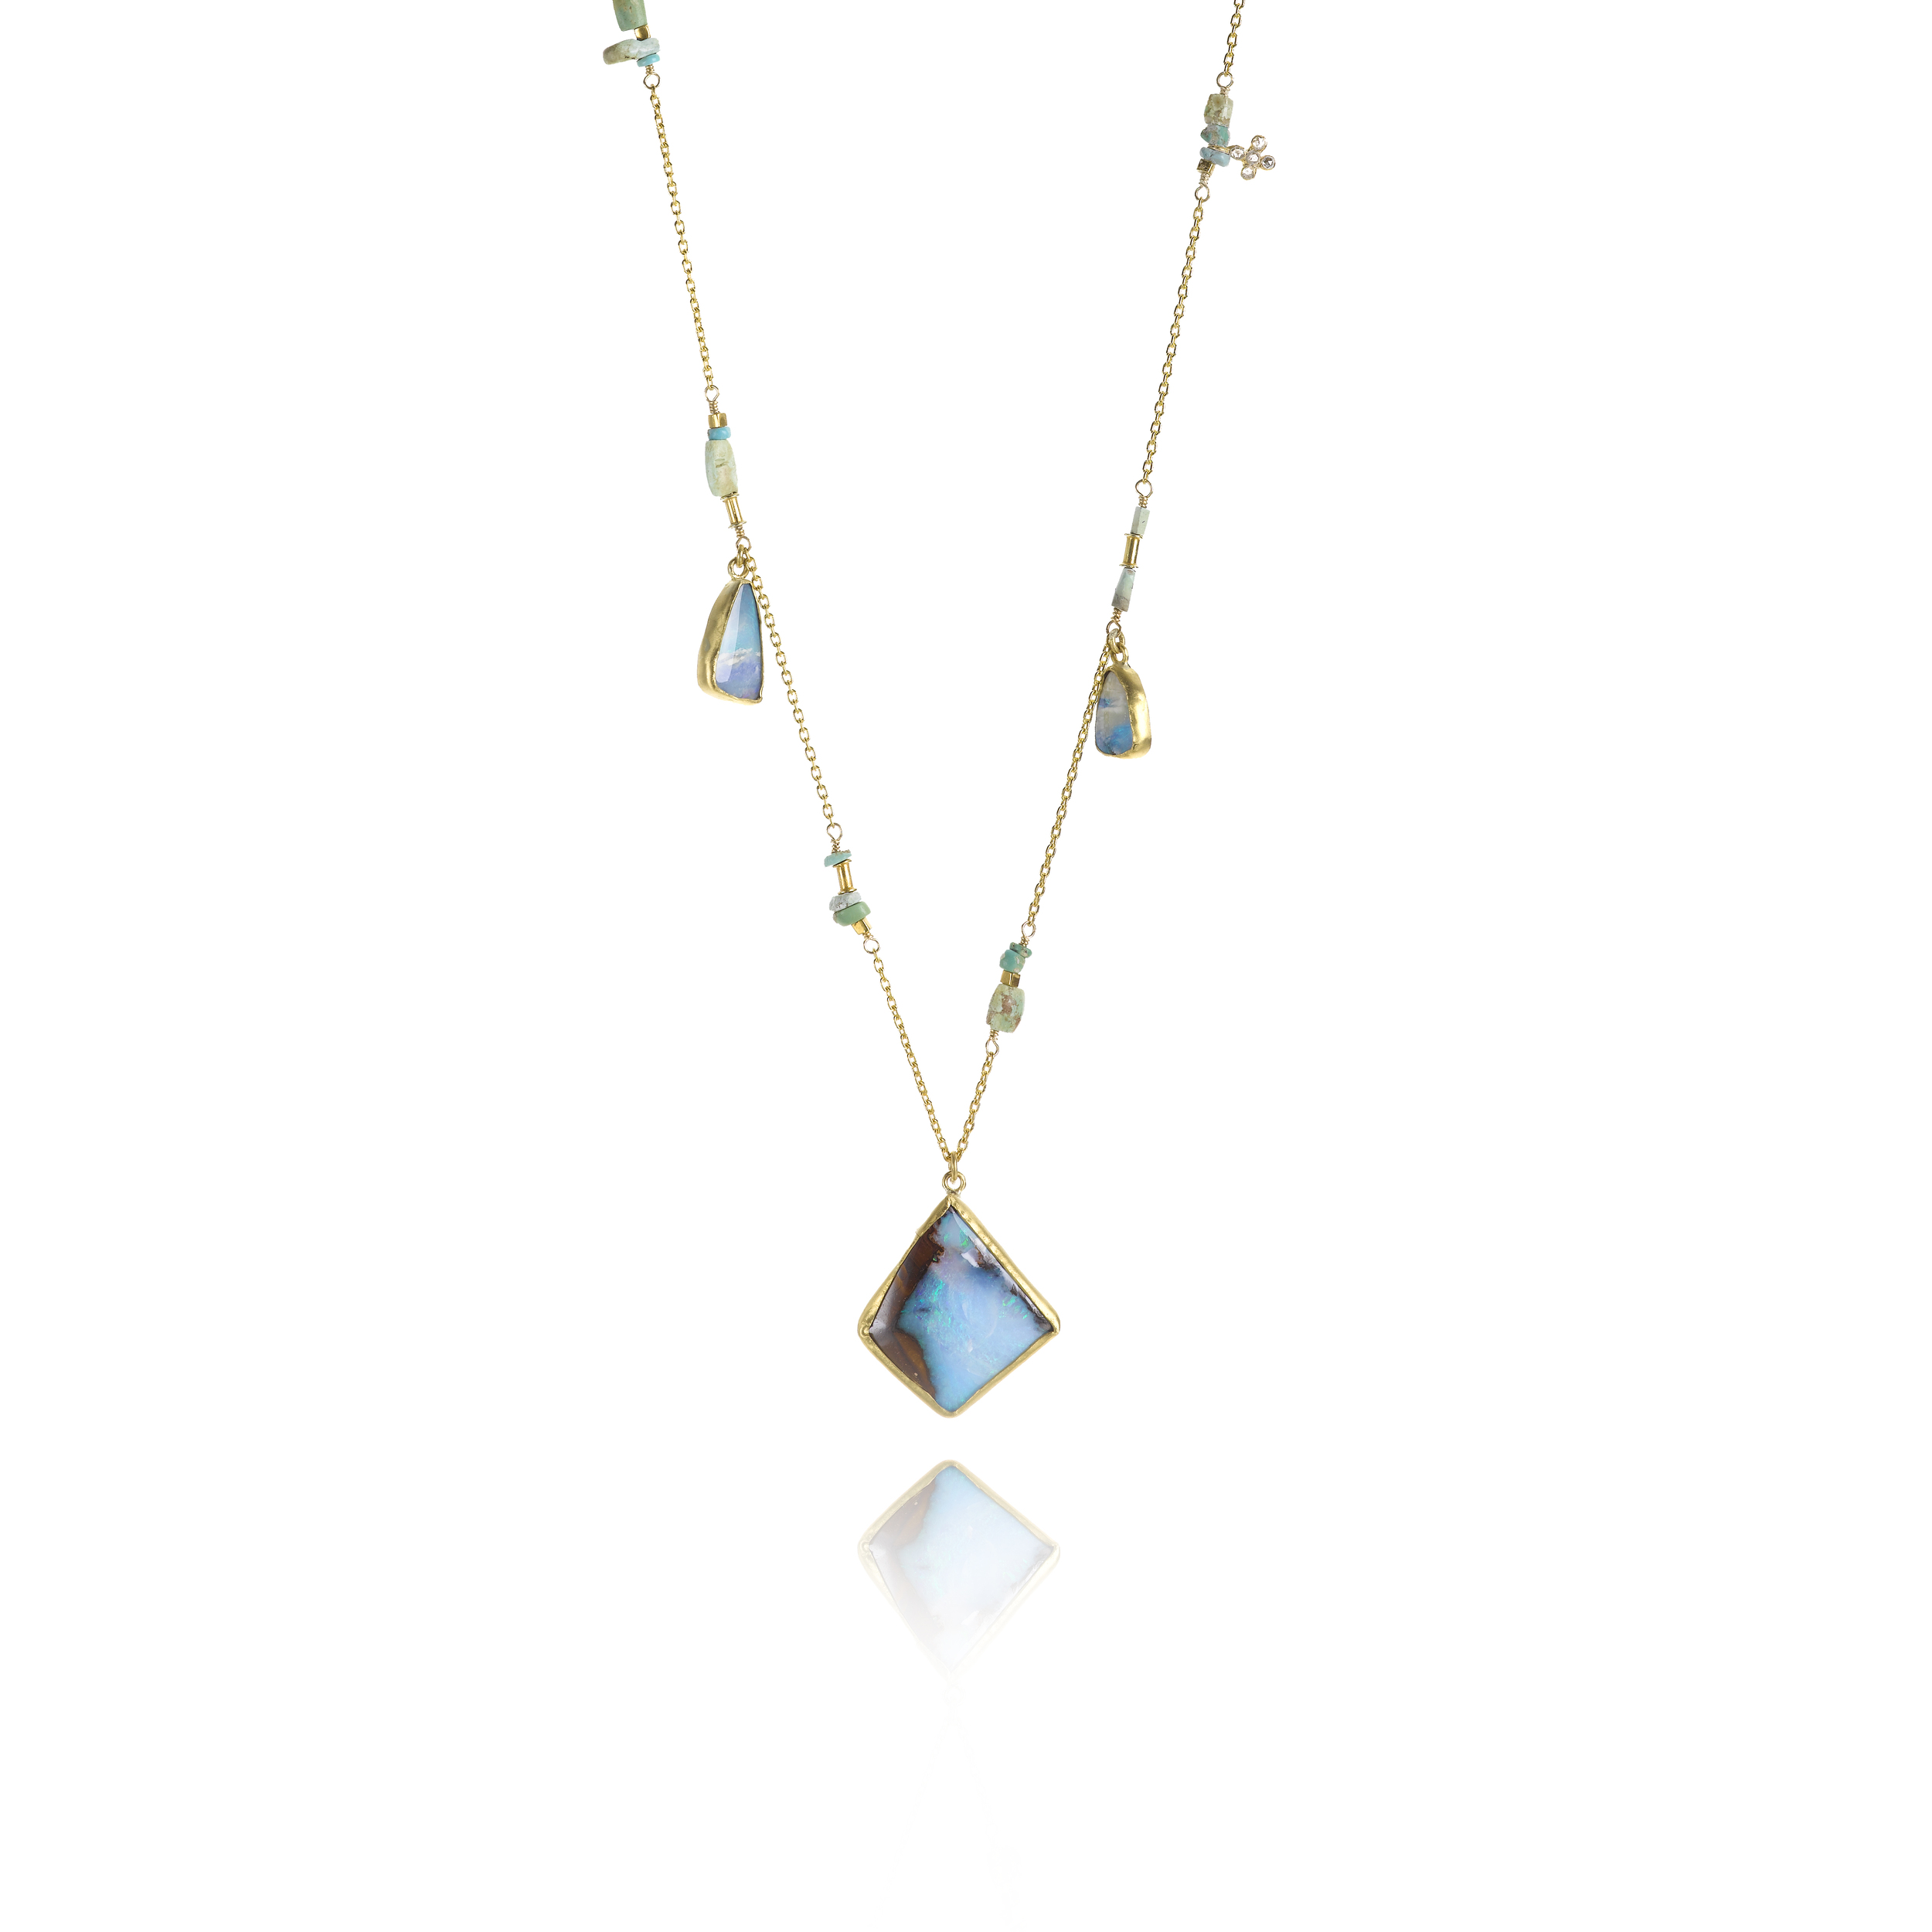  22k necklace with Boulder opal, turquoise and diamond,&nbsp;$6,580. 